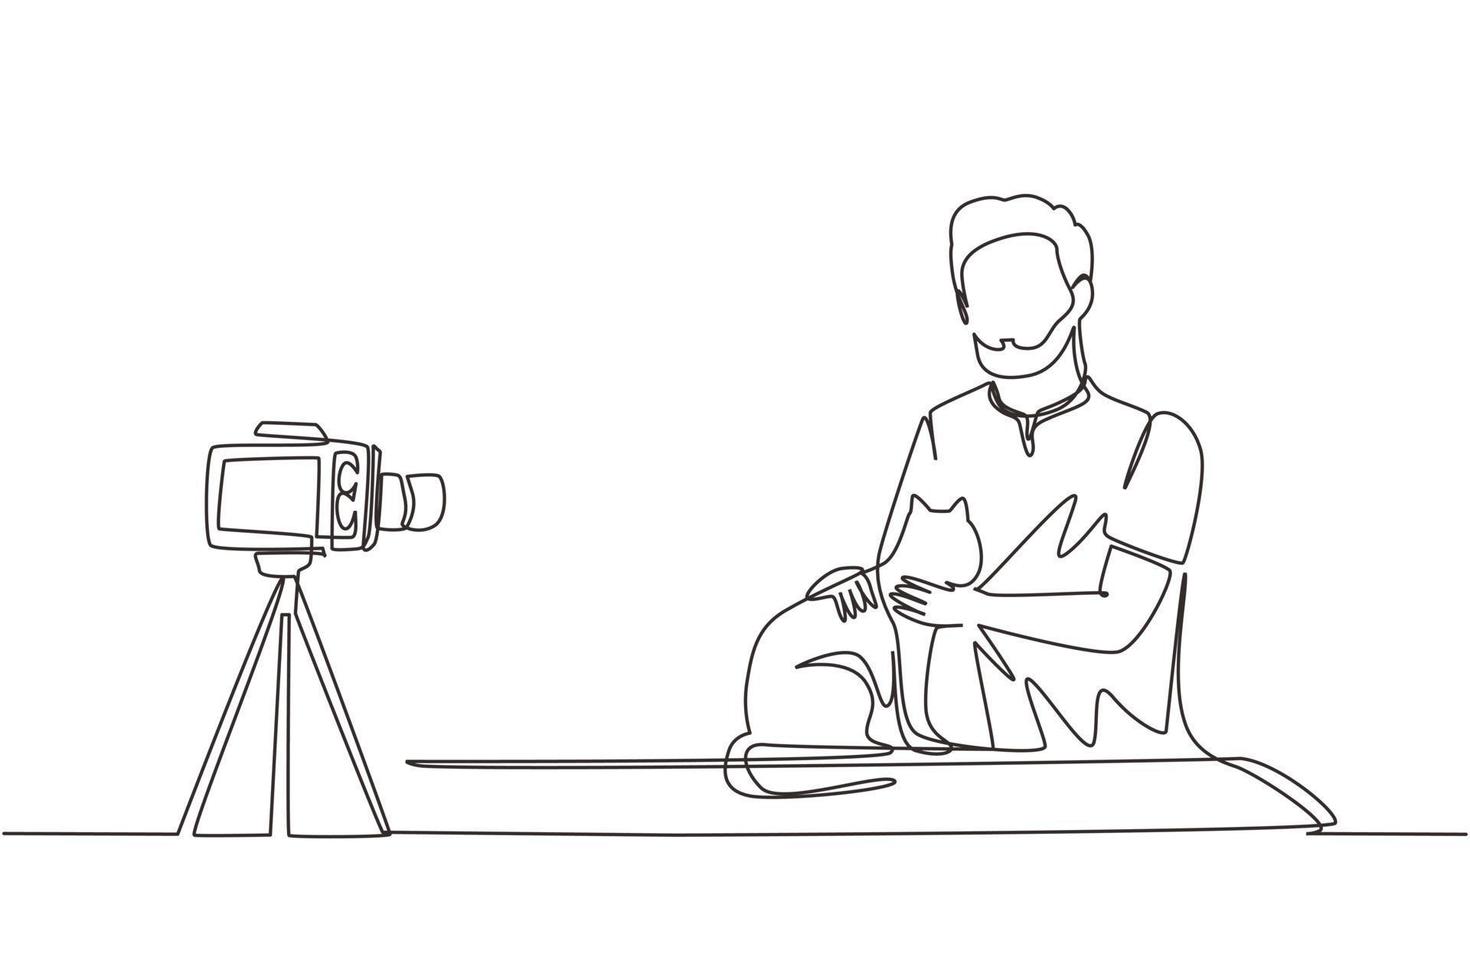 Continuous one line drawing teenage pet blogger. Arabian teen boy with cat recording video on camera. Hobbies and leisure, blogging about pet, animal lover. Single line draw design vector illustration